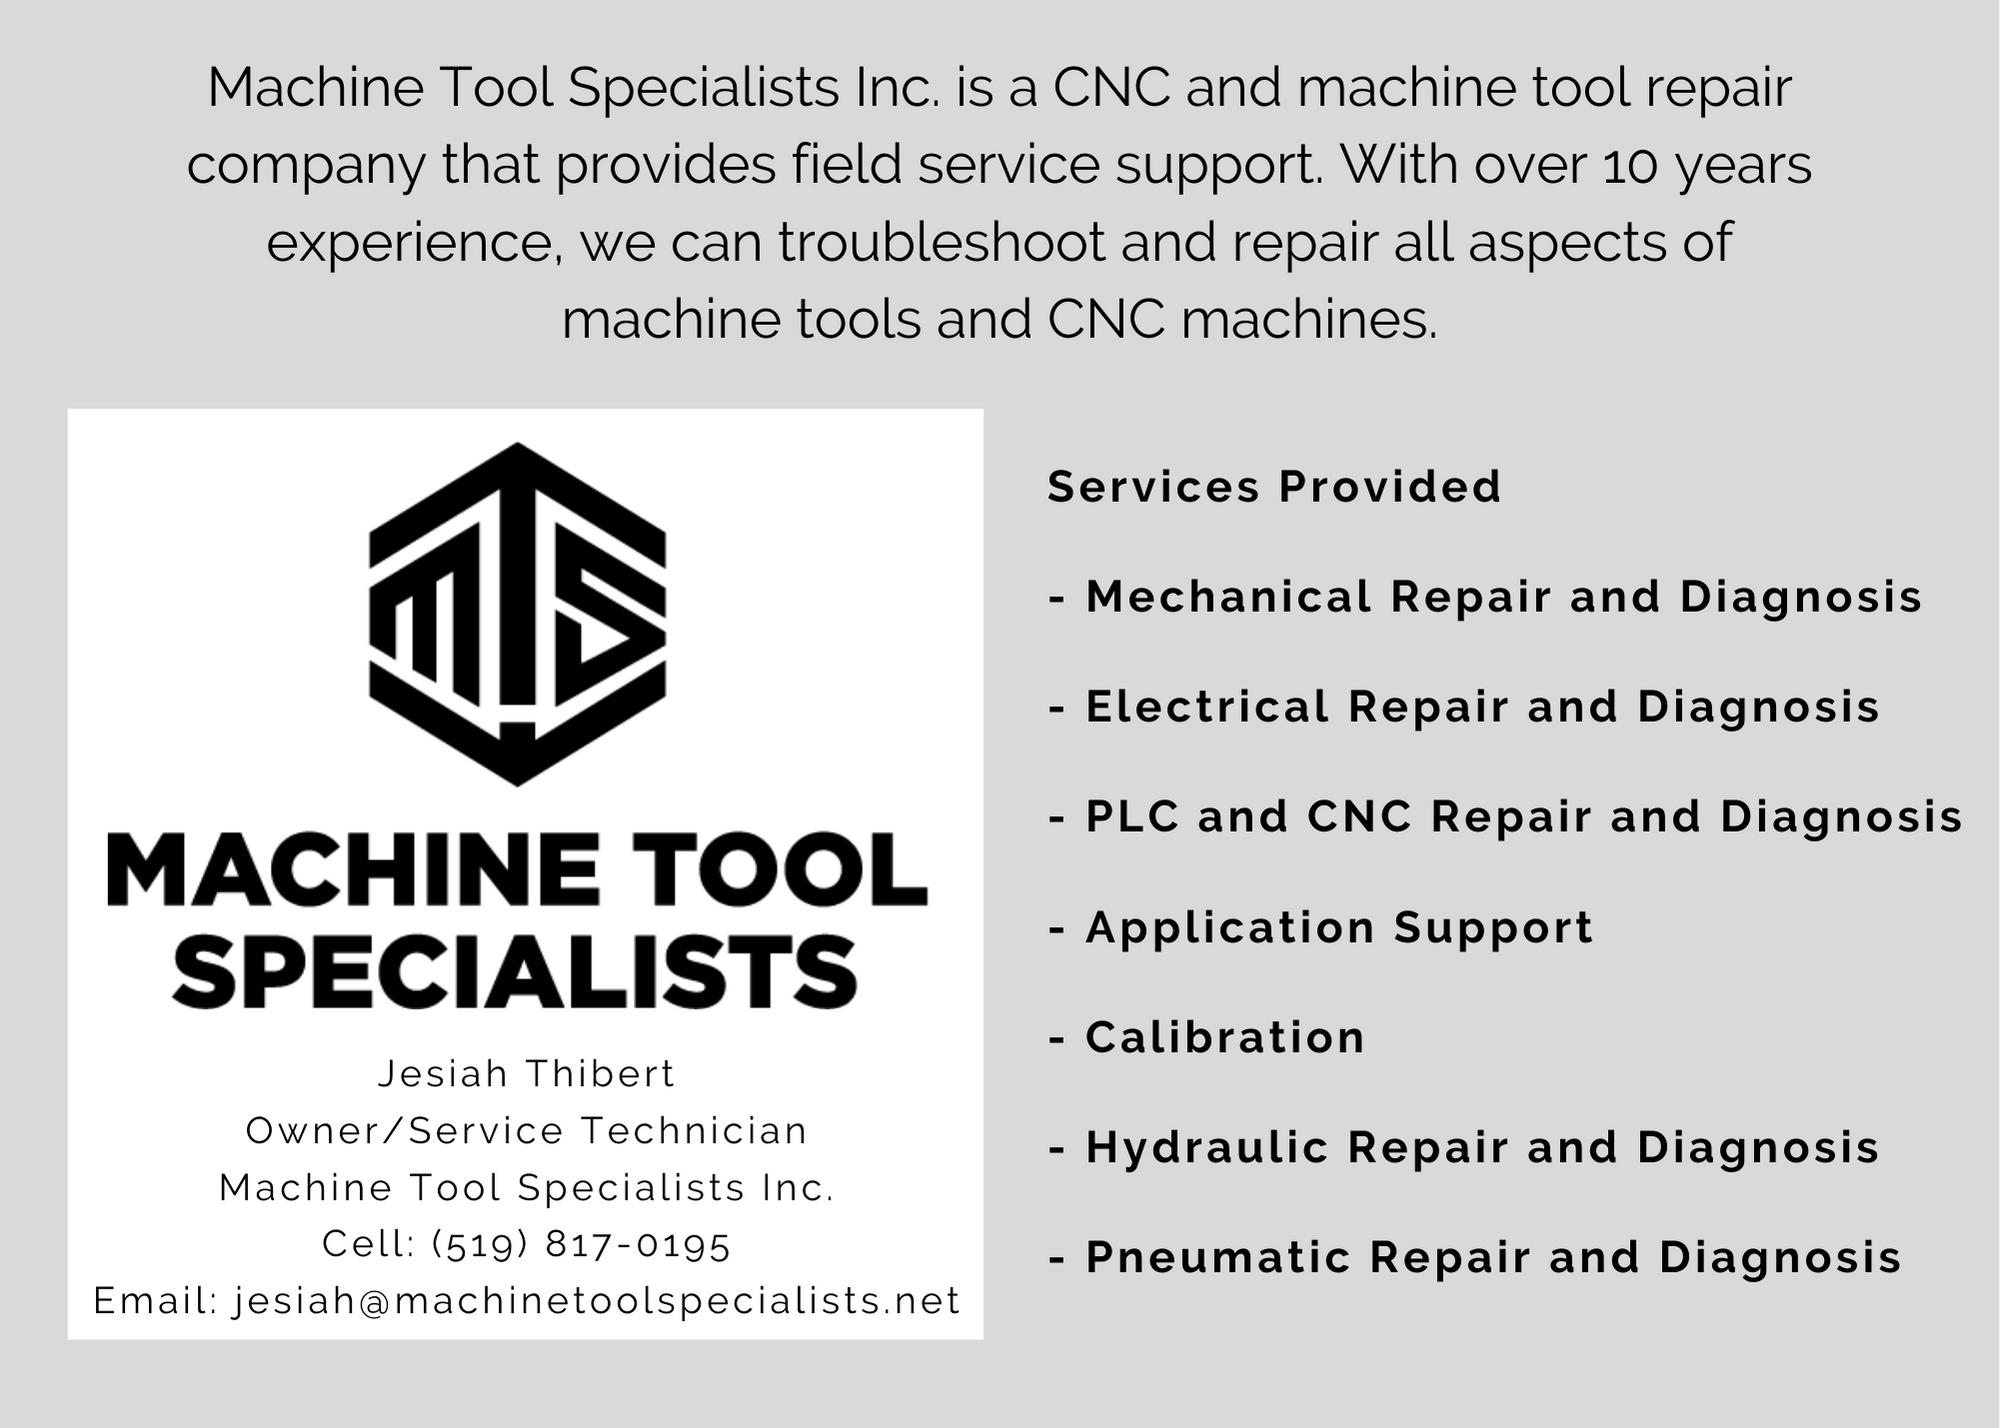 Machine tool specialist logo and advertisement 